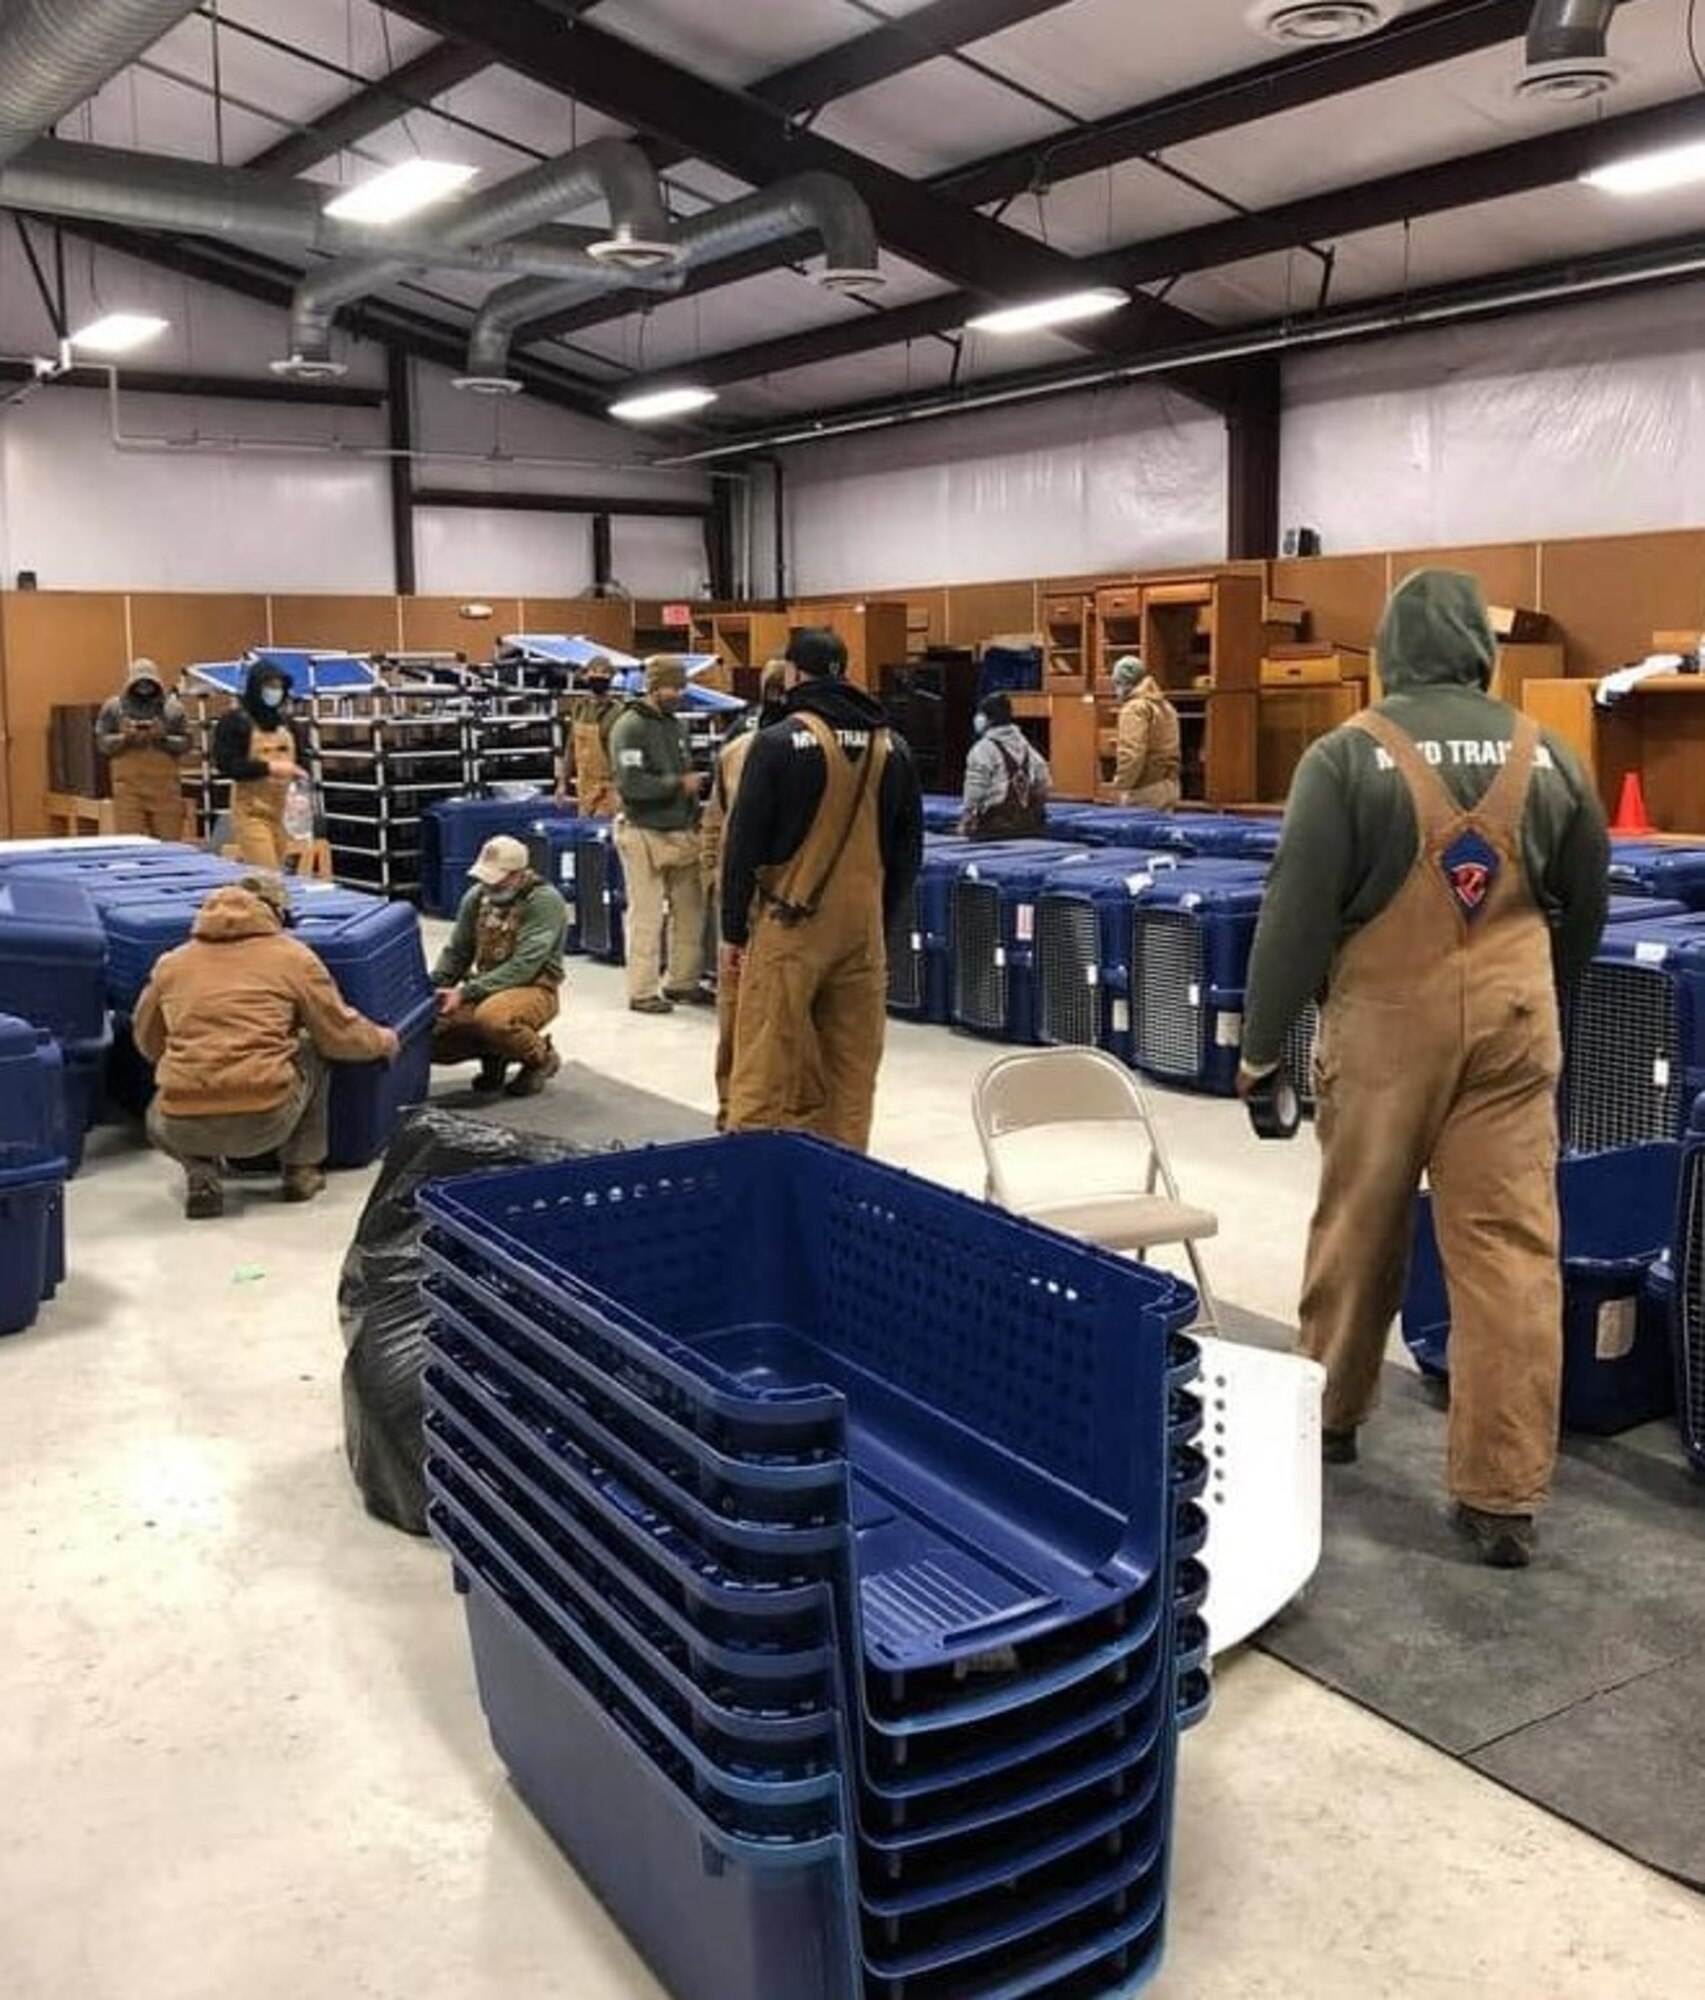 Teams put together crates, moved food, set up walking tracks and provided food and drinks in order to get four-legged warriors indoors in anticipation of this week’s cold conditions at Joint Base San Antonio, Texas.